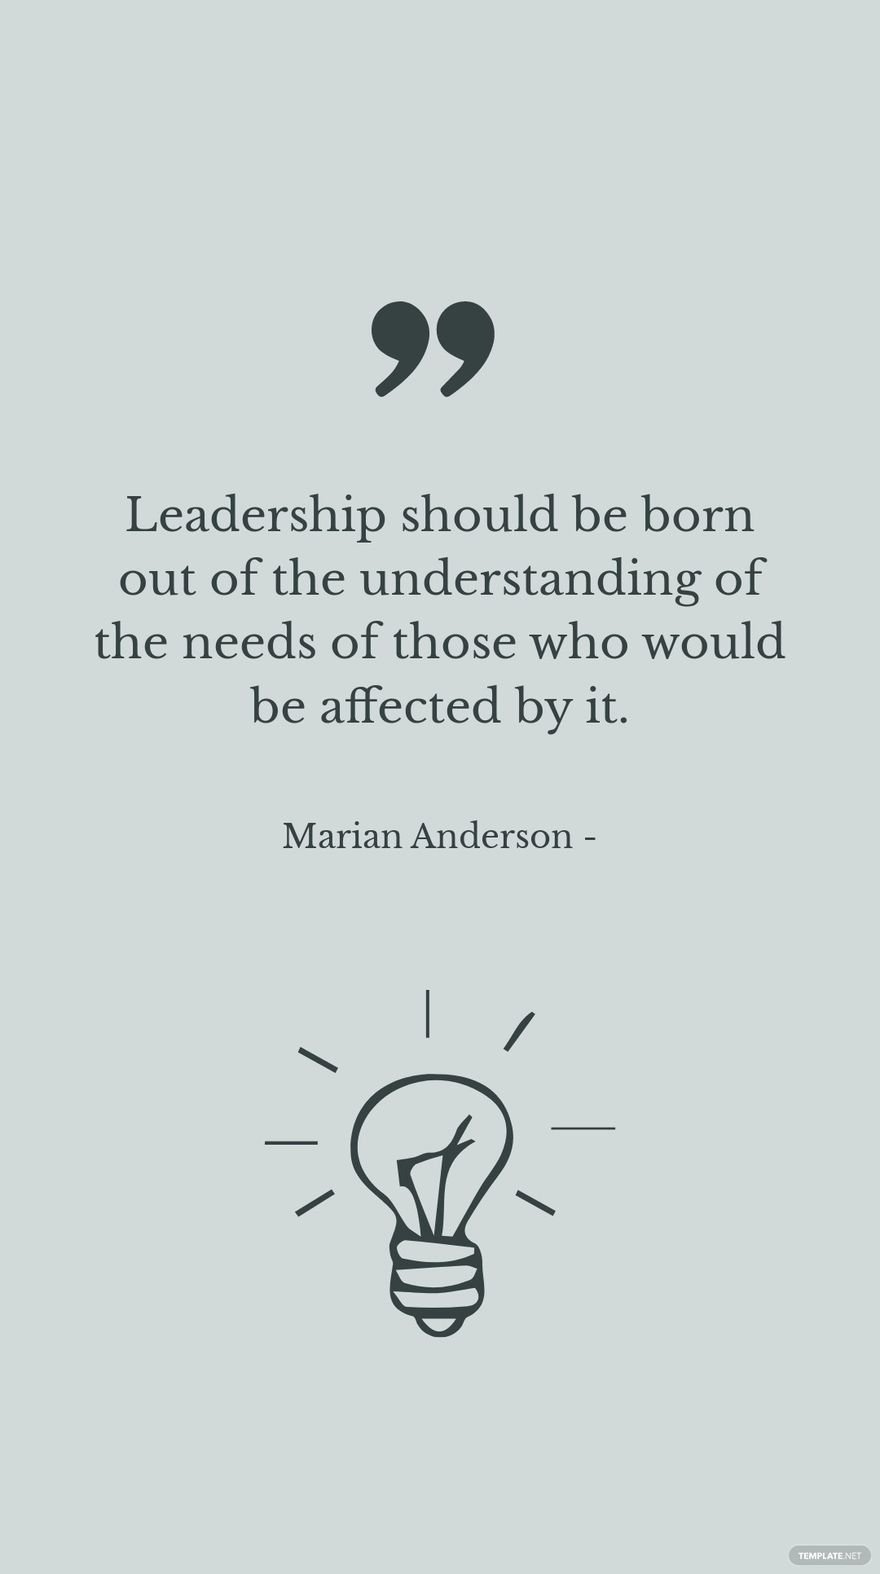 Marian Anderson - Leadership should be born out of the understanding of the needs of those who would be affected by it.